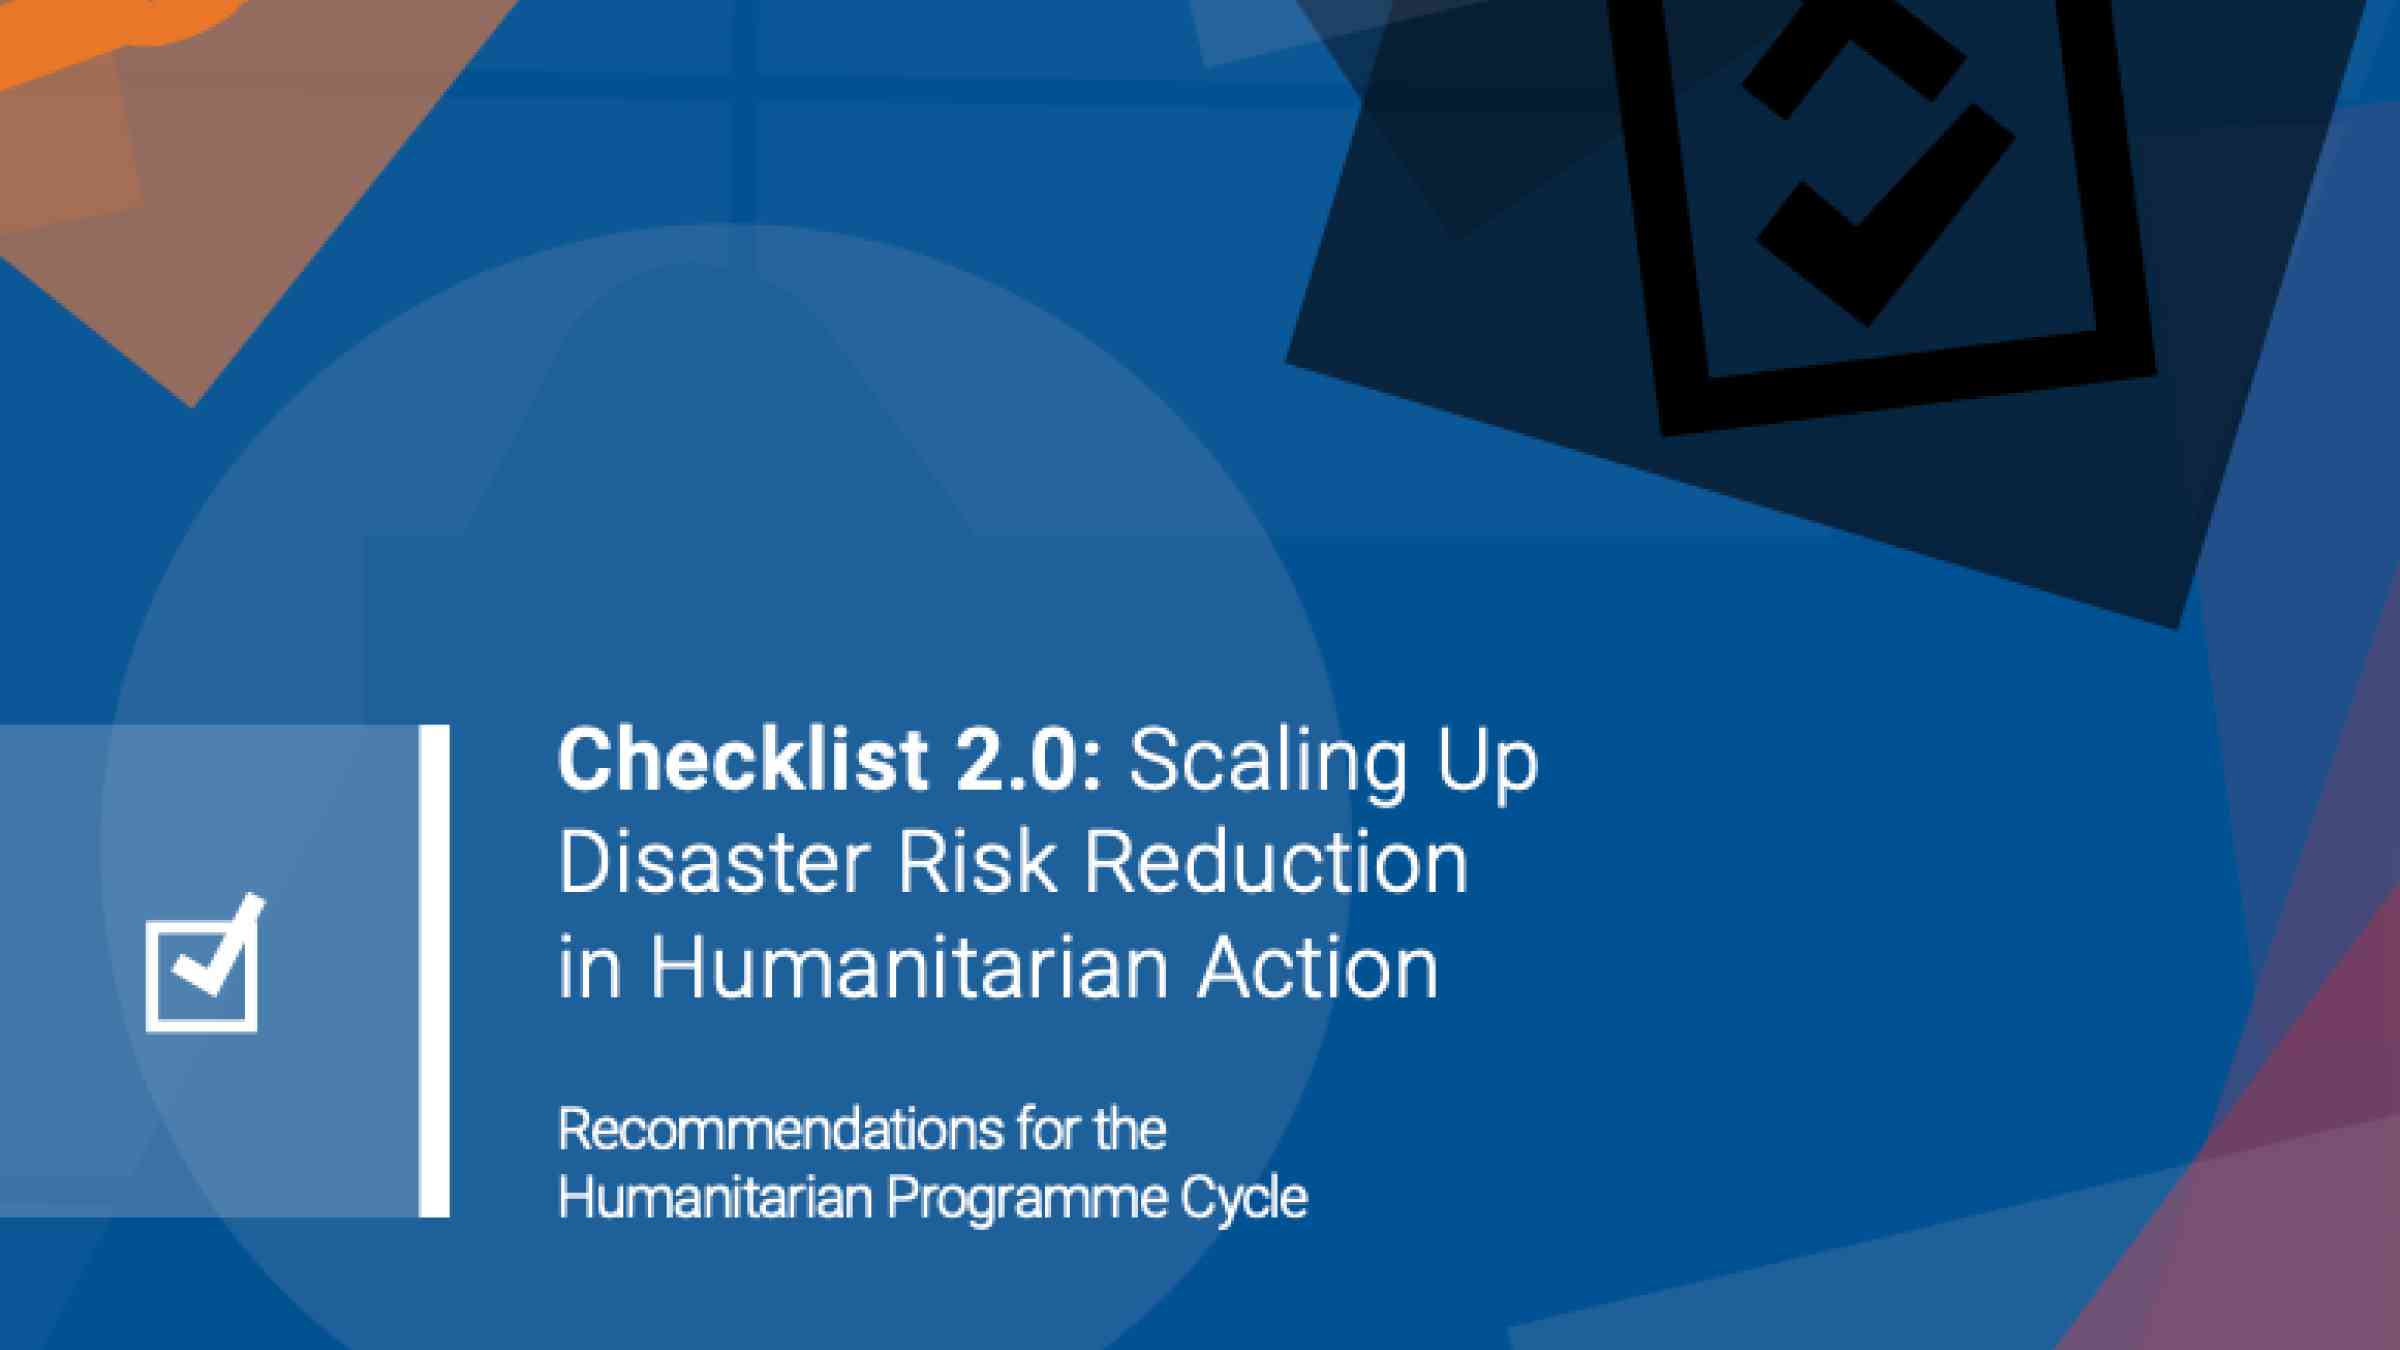 Checklist on scaling up DRR in Humanitarian action